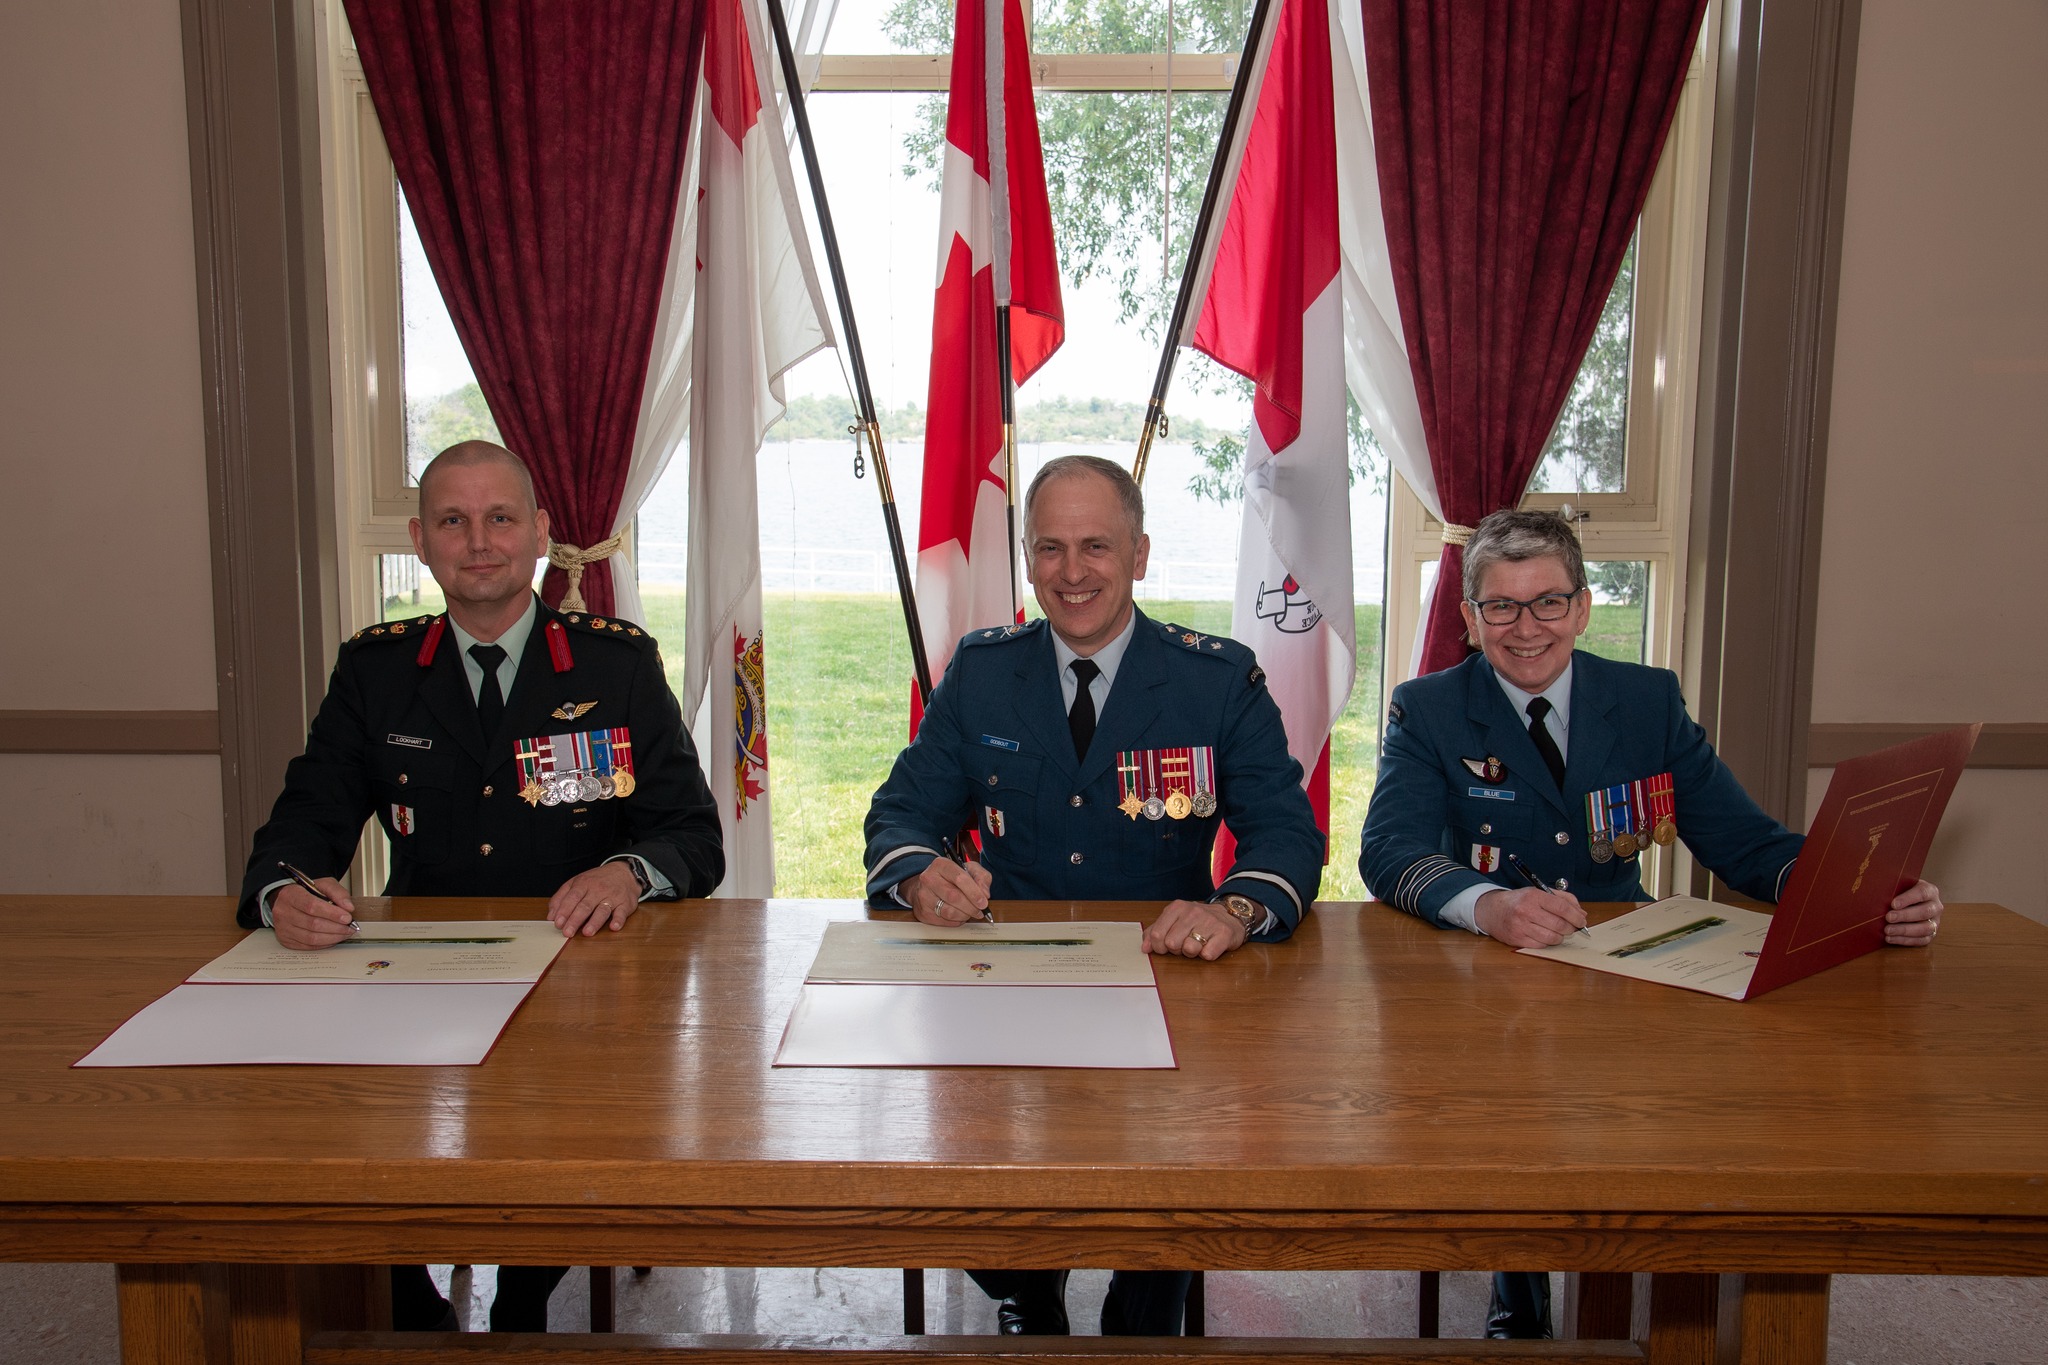 Director of Cadets Change of Command ceremony held at the Royal Military College of Canada (RMC) to say farewell to Colonel Paul Lockhart and to welcome Colonel Cathy Blue. In this photo, Colonel Paul Lockhart, out-going Director of Cadets (left); Brigadier-General Pascal Godbout, Commandant of the RMC (center) and Colonel Cathy Blue, in-coming Director of Cadets (right) sign the Change of Command forms. Senior Staff Mess, Kingston, ON on June 21, 2023.

Image by: Sailor First Class Lisa Sheppard, Imagery T